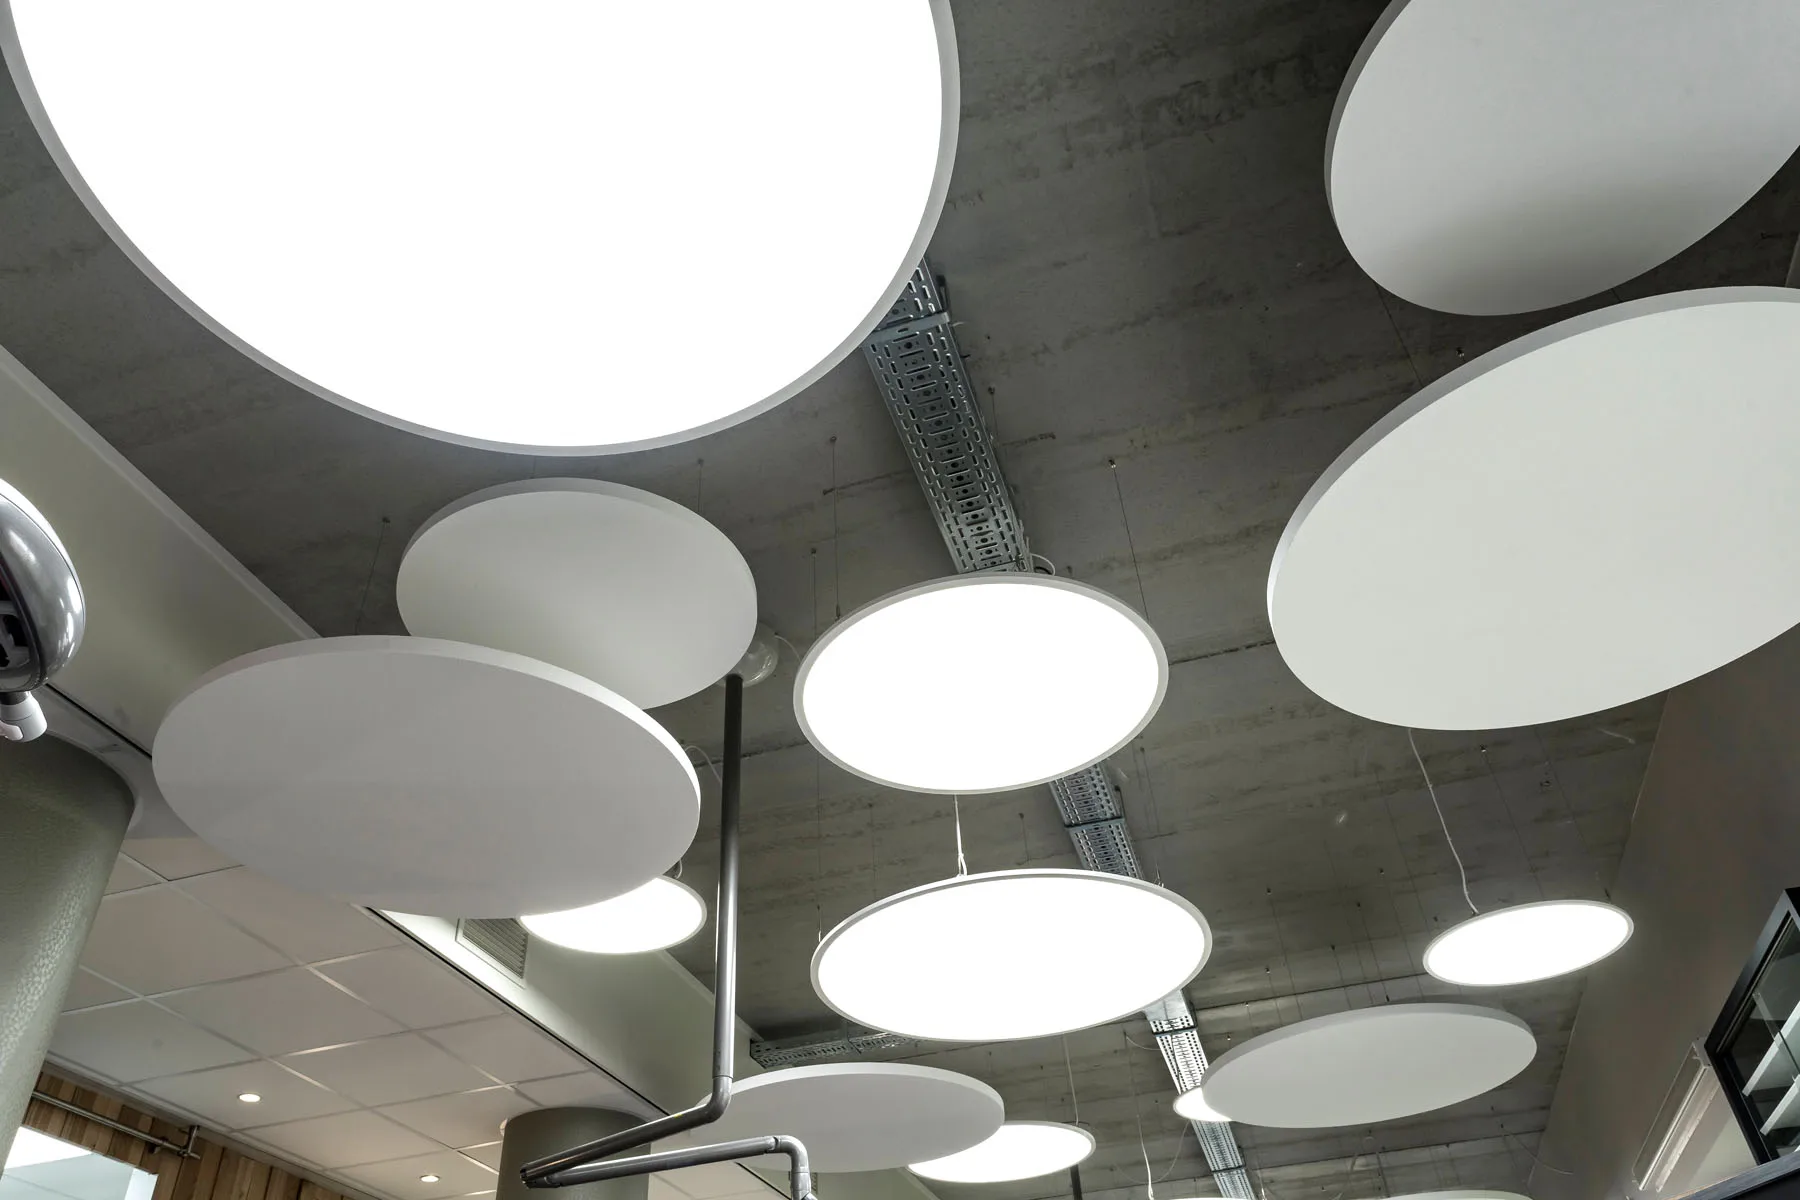 Used in offices dinning room led home lighting 1200mm slim round led panel ceiling light